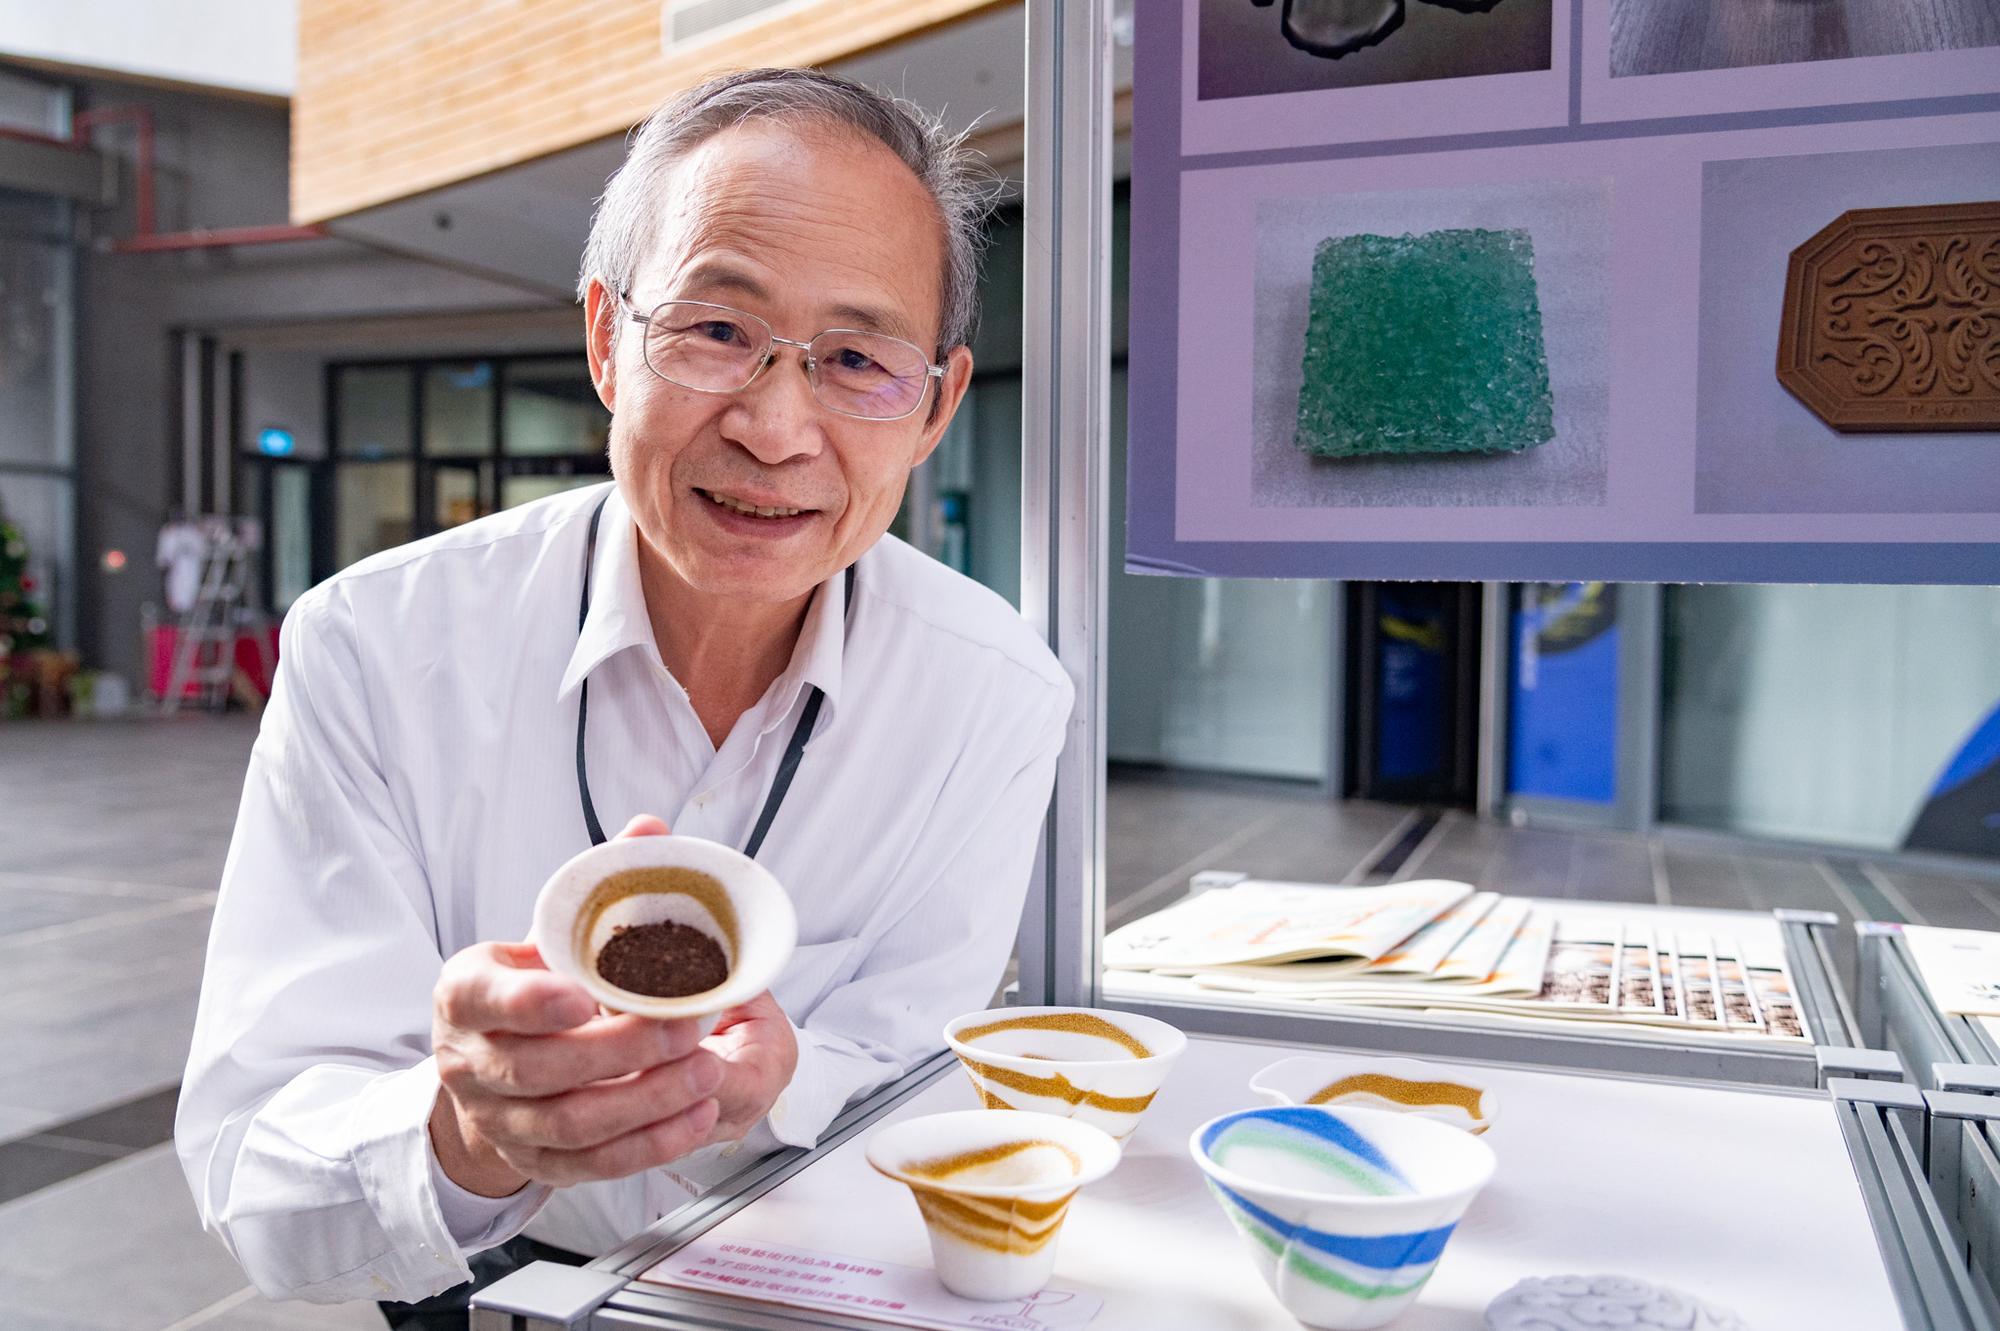 Professor Ming-Twen Shiau (蕭銘芚), from the Department of Arts and Design at NTHU, developed reusable glass filter cups that replace disposable filter paper.